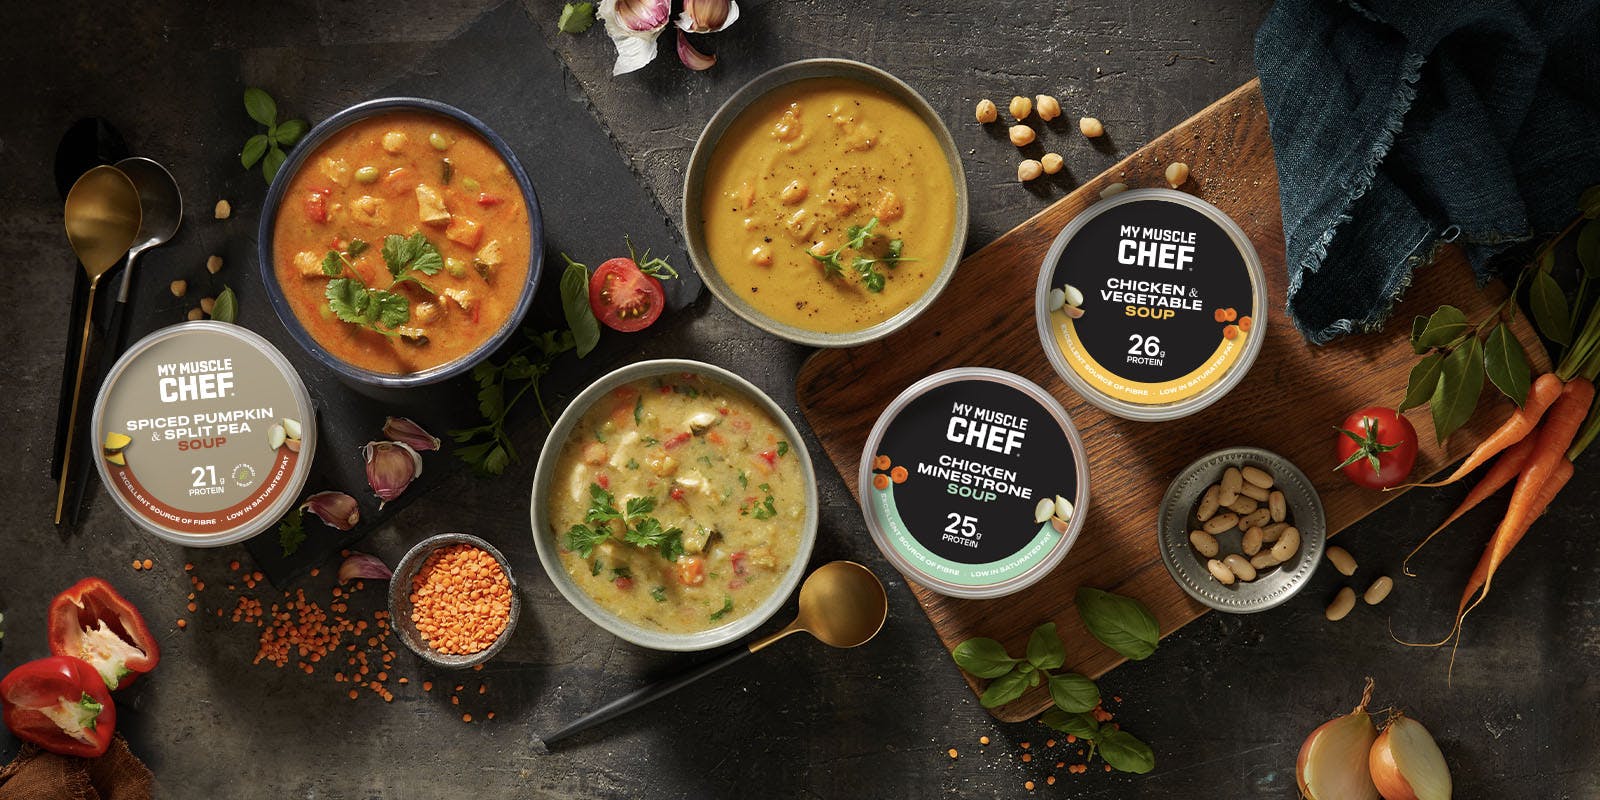 My Muscle Chef Soup range